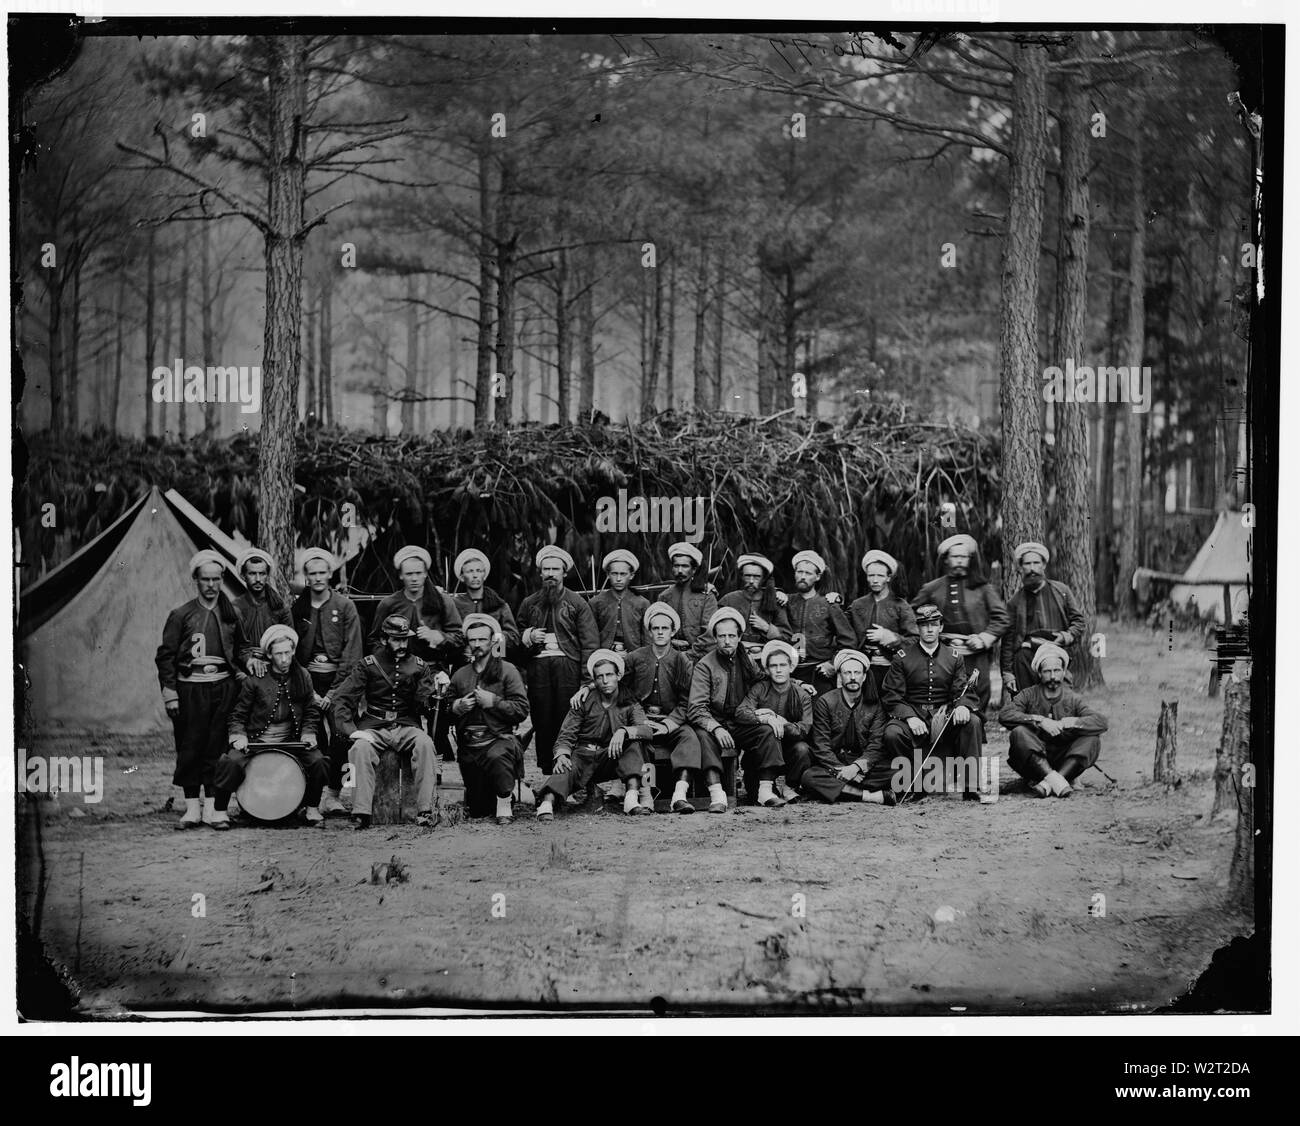 Petersburg, Va. Company H, 114th Pennsylvania Infantry (Zouaves); Photograph from the main eastern theater of war, the siege of Petersburg, June 1864-April 1865. Stock Photo